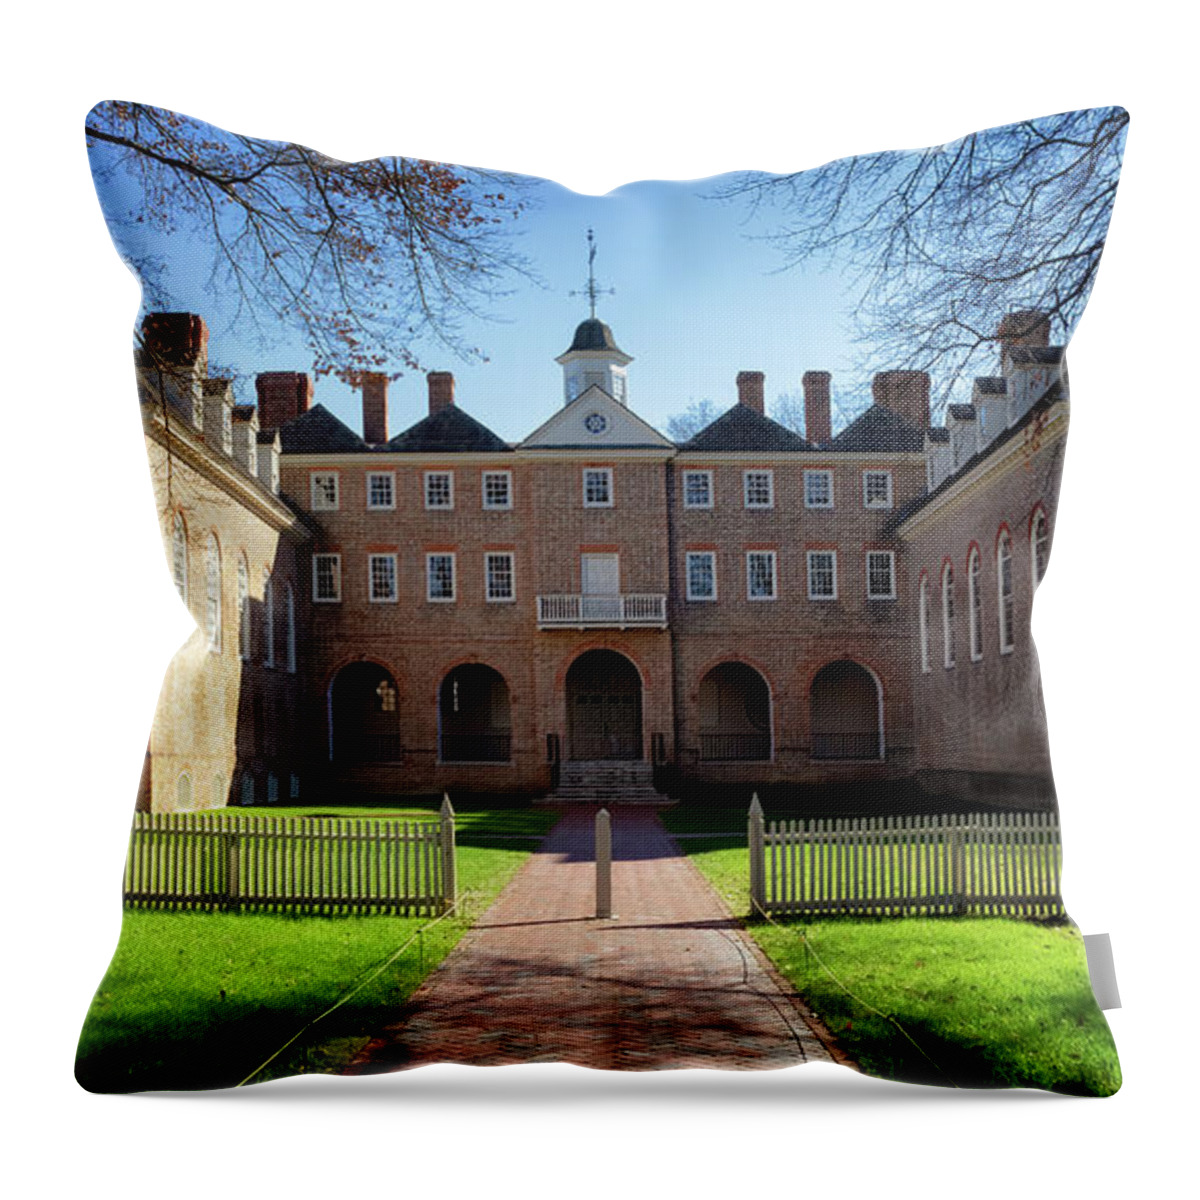 Wren Building Throw Pillow featuring the photograph The Wren Building Courtyard - Williamsburg, Virginia by Susan Rissi Tregoning